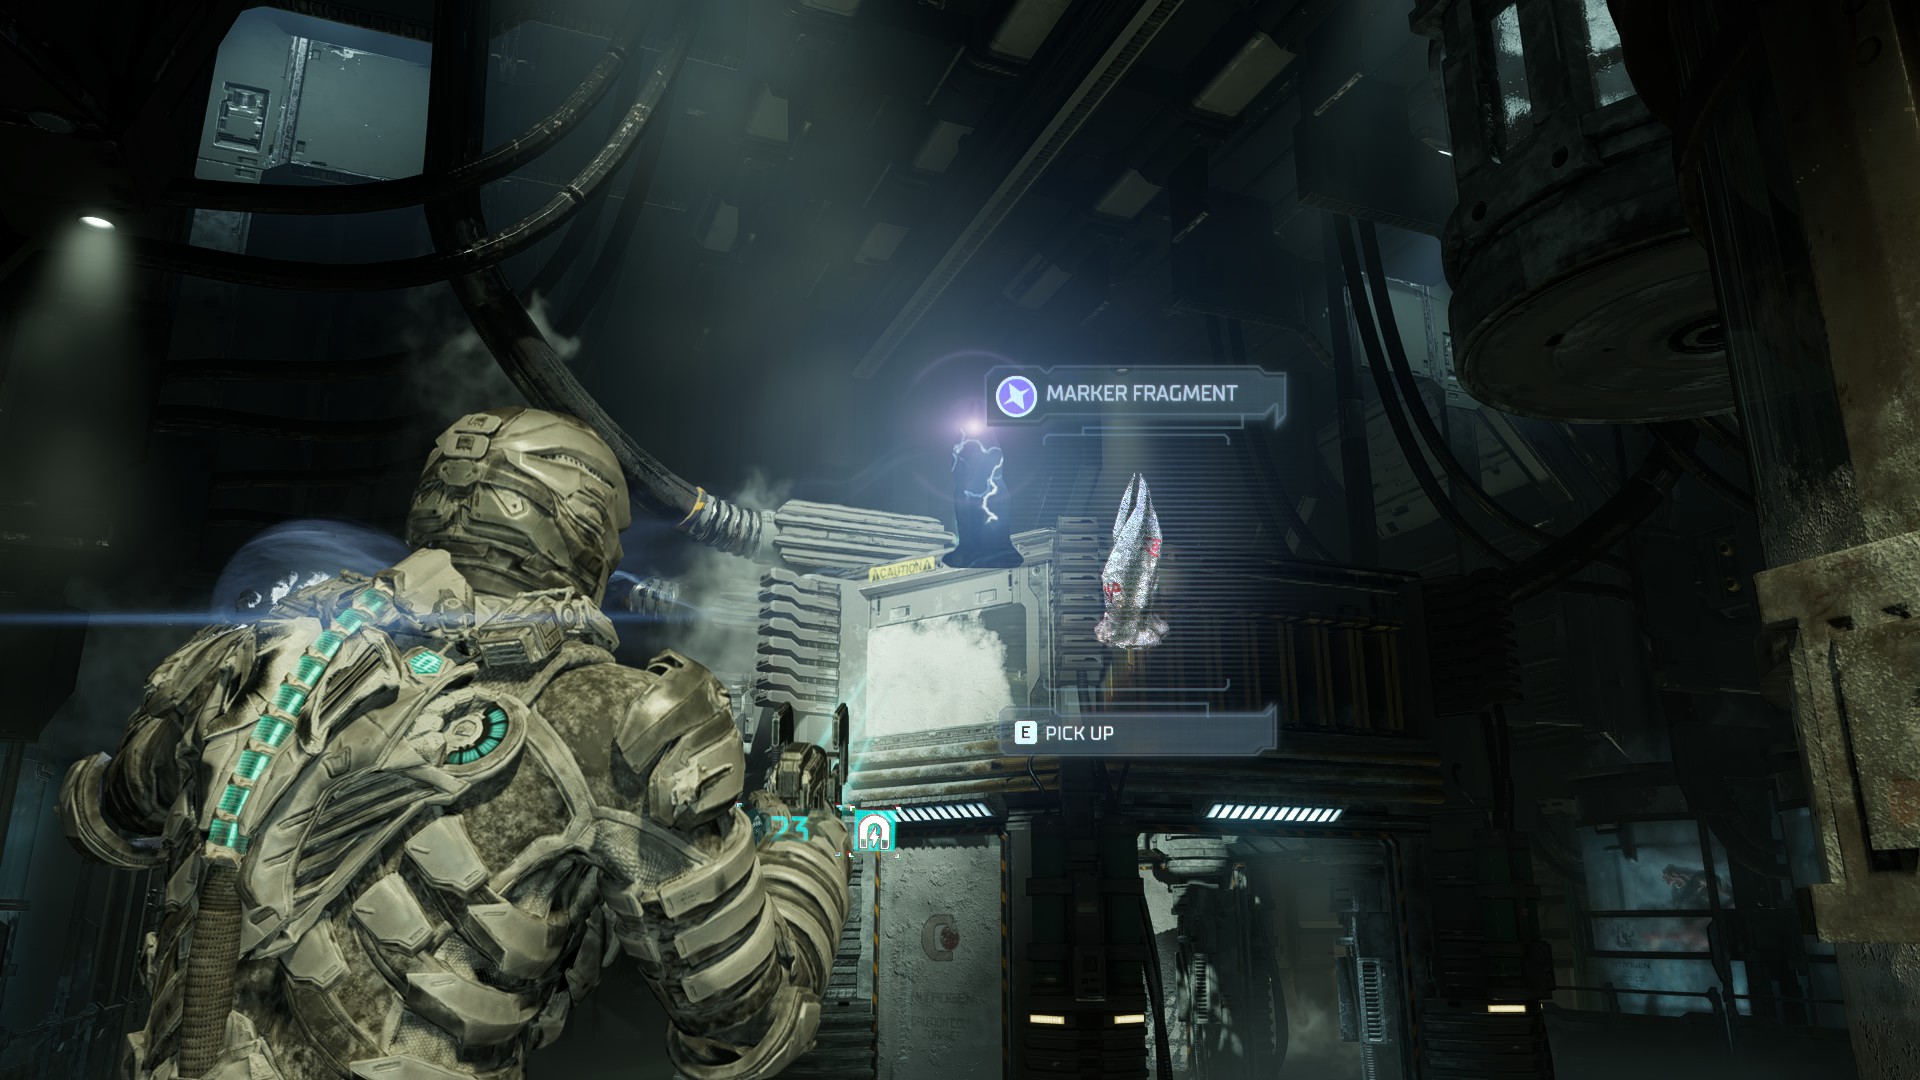 Dead Space Marker Fragment during chapter five in Medical